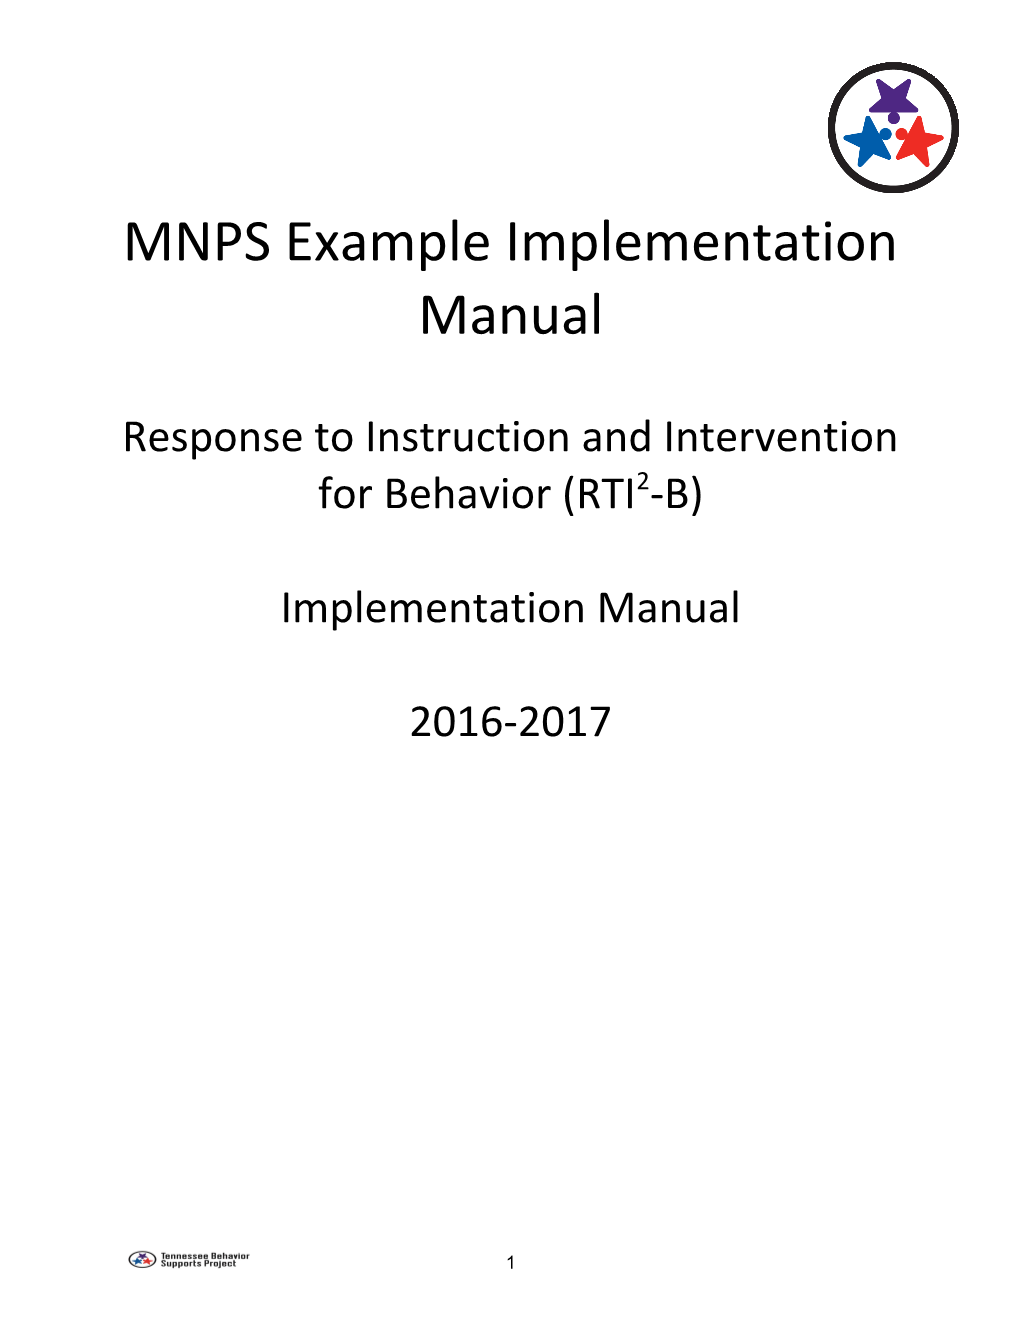 MNPS Example Implementation Manual